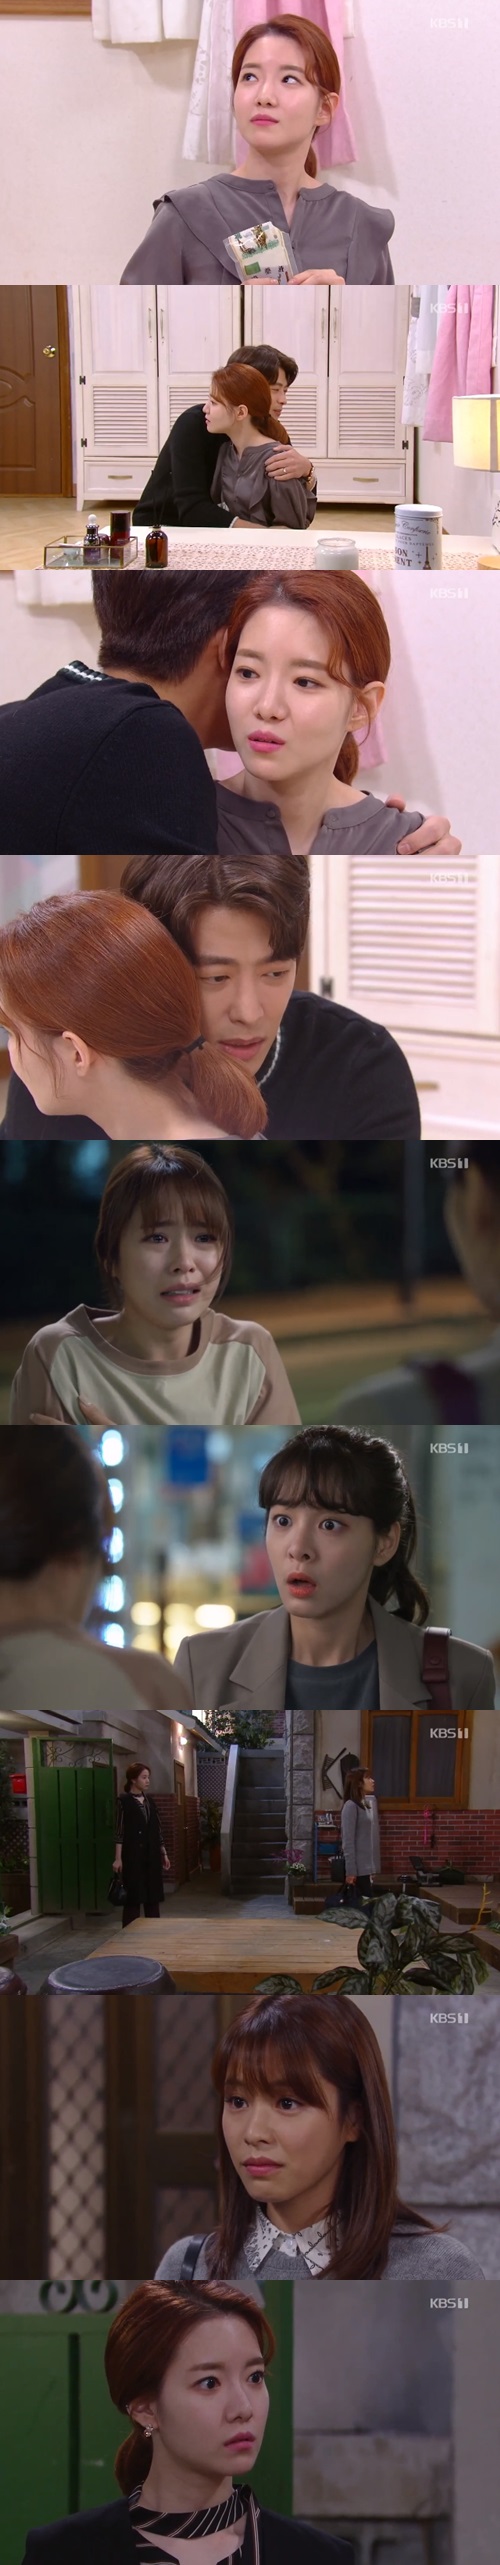 Hong Ah-reum tricked Seol In-ah into a house.Choi Youra (Hong Ah-reum) approached the real Han Soo-jung and Kang Ha-nui (Sul In-ah) in the 107th KBS 1TV evening drama Tomorrow is Clear) broadcast on October 15.Choi Youra approached his father, a fake Han Soo-jung who threatened Yun Hee-hee (the exponent), and found out that Yun Hee-hee was hiding the real Han Soo-jung and that the real Han Soo-jung was strong.Choi Youra went to the front of the house of the river and was cynical when she saw Yun Jin-hee (Shim Hye-jin) and Hwang Ji (Seung-Ri Ha).Choi Youra deliberately started playing poor chuck shows in front of the downs, pretending to be in debt in front of the downs, and even falling deliberately.The downside was sympathetic to the fact that Choi Youra saved Yun Hee-hees life, got a job at the correctional tik, and was sorry for the situation.I also saw Choi Youra bleeding at a convenience store in the neighborhood.In the meantime, Yun Hee-hee borrowed money from his mother, Mrs. Moon, on an excuse for a divorced friend.Yun Hee-hee wept lately as he was caught in a corner by his fake Han Soo-jung father following Choi Youra.Yun Hee-hee said, I envy you the most, as her husband Hwang Dong-seok (Kim Myung-soo) looked at Park Jin-guk (Choi Jae-sung) as she was happy to eat Hanwoo.Hwang Ji knew that her husband Park Do-kyung (Lee Chang-wook) misunderstood that she had abandoned her pregnancy pills when she saw her abandon her medicine.Hwang Ji, who can not tell the truth, lied about the new medicine and said, The first medicine was used, and Park Doo-kyung hugged Hwang Ji, I am sorry for misunderstanding.Lee Han-gyul (Pearl-type) declared independence when his mother Kim So-hyun (Choi Wan-jung) continued to harass the downswing, and Kim So-hyun declared a hunger strike to prevent it.Kim So-hyun, however, could not stand hunger and secretly ate late-night snacks every day, and her husband Lee Sang-hoon (Seo Hyun-chul) was impressed with her allowance in exchange for keeping secrets.Lee Sang-hoon asked the Ganghaeng to dry Lee Han-gyul.Yoo Gyeong-sang